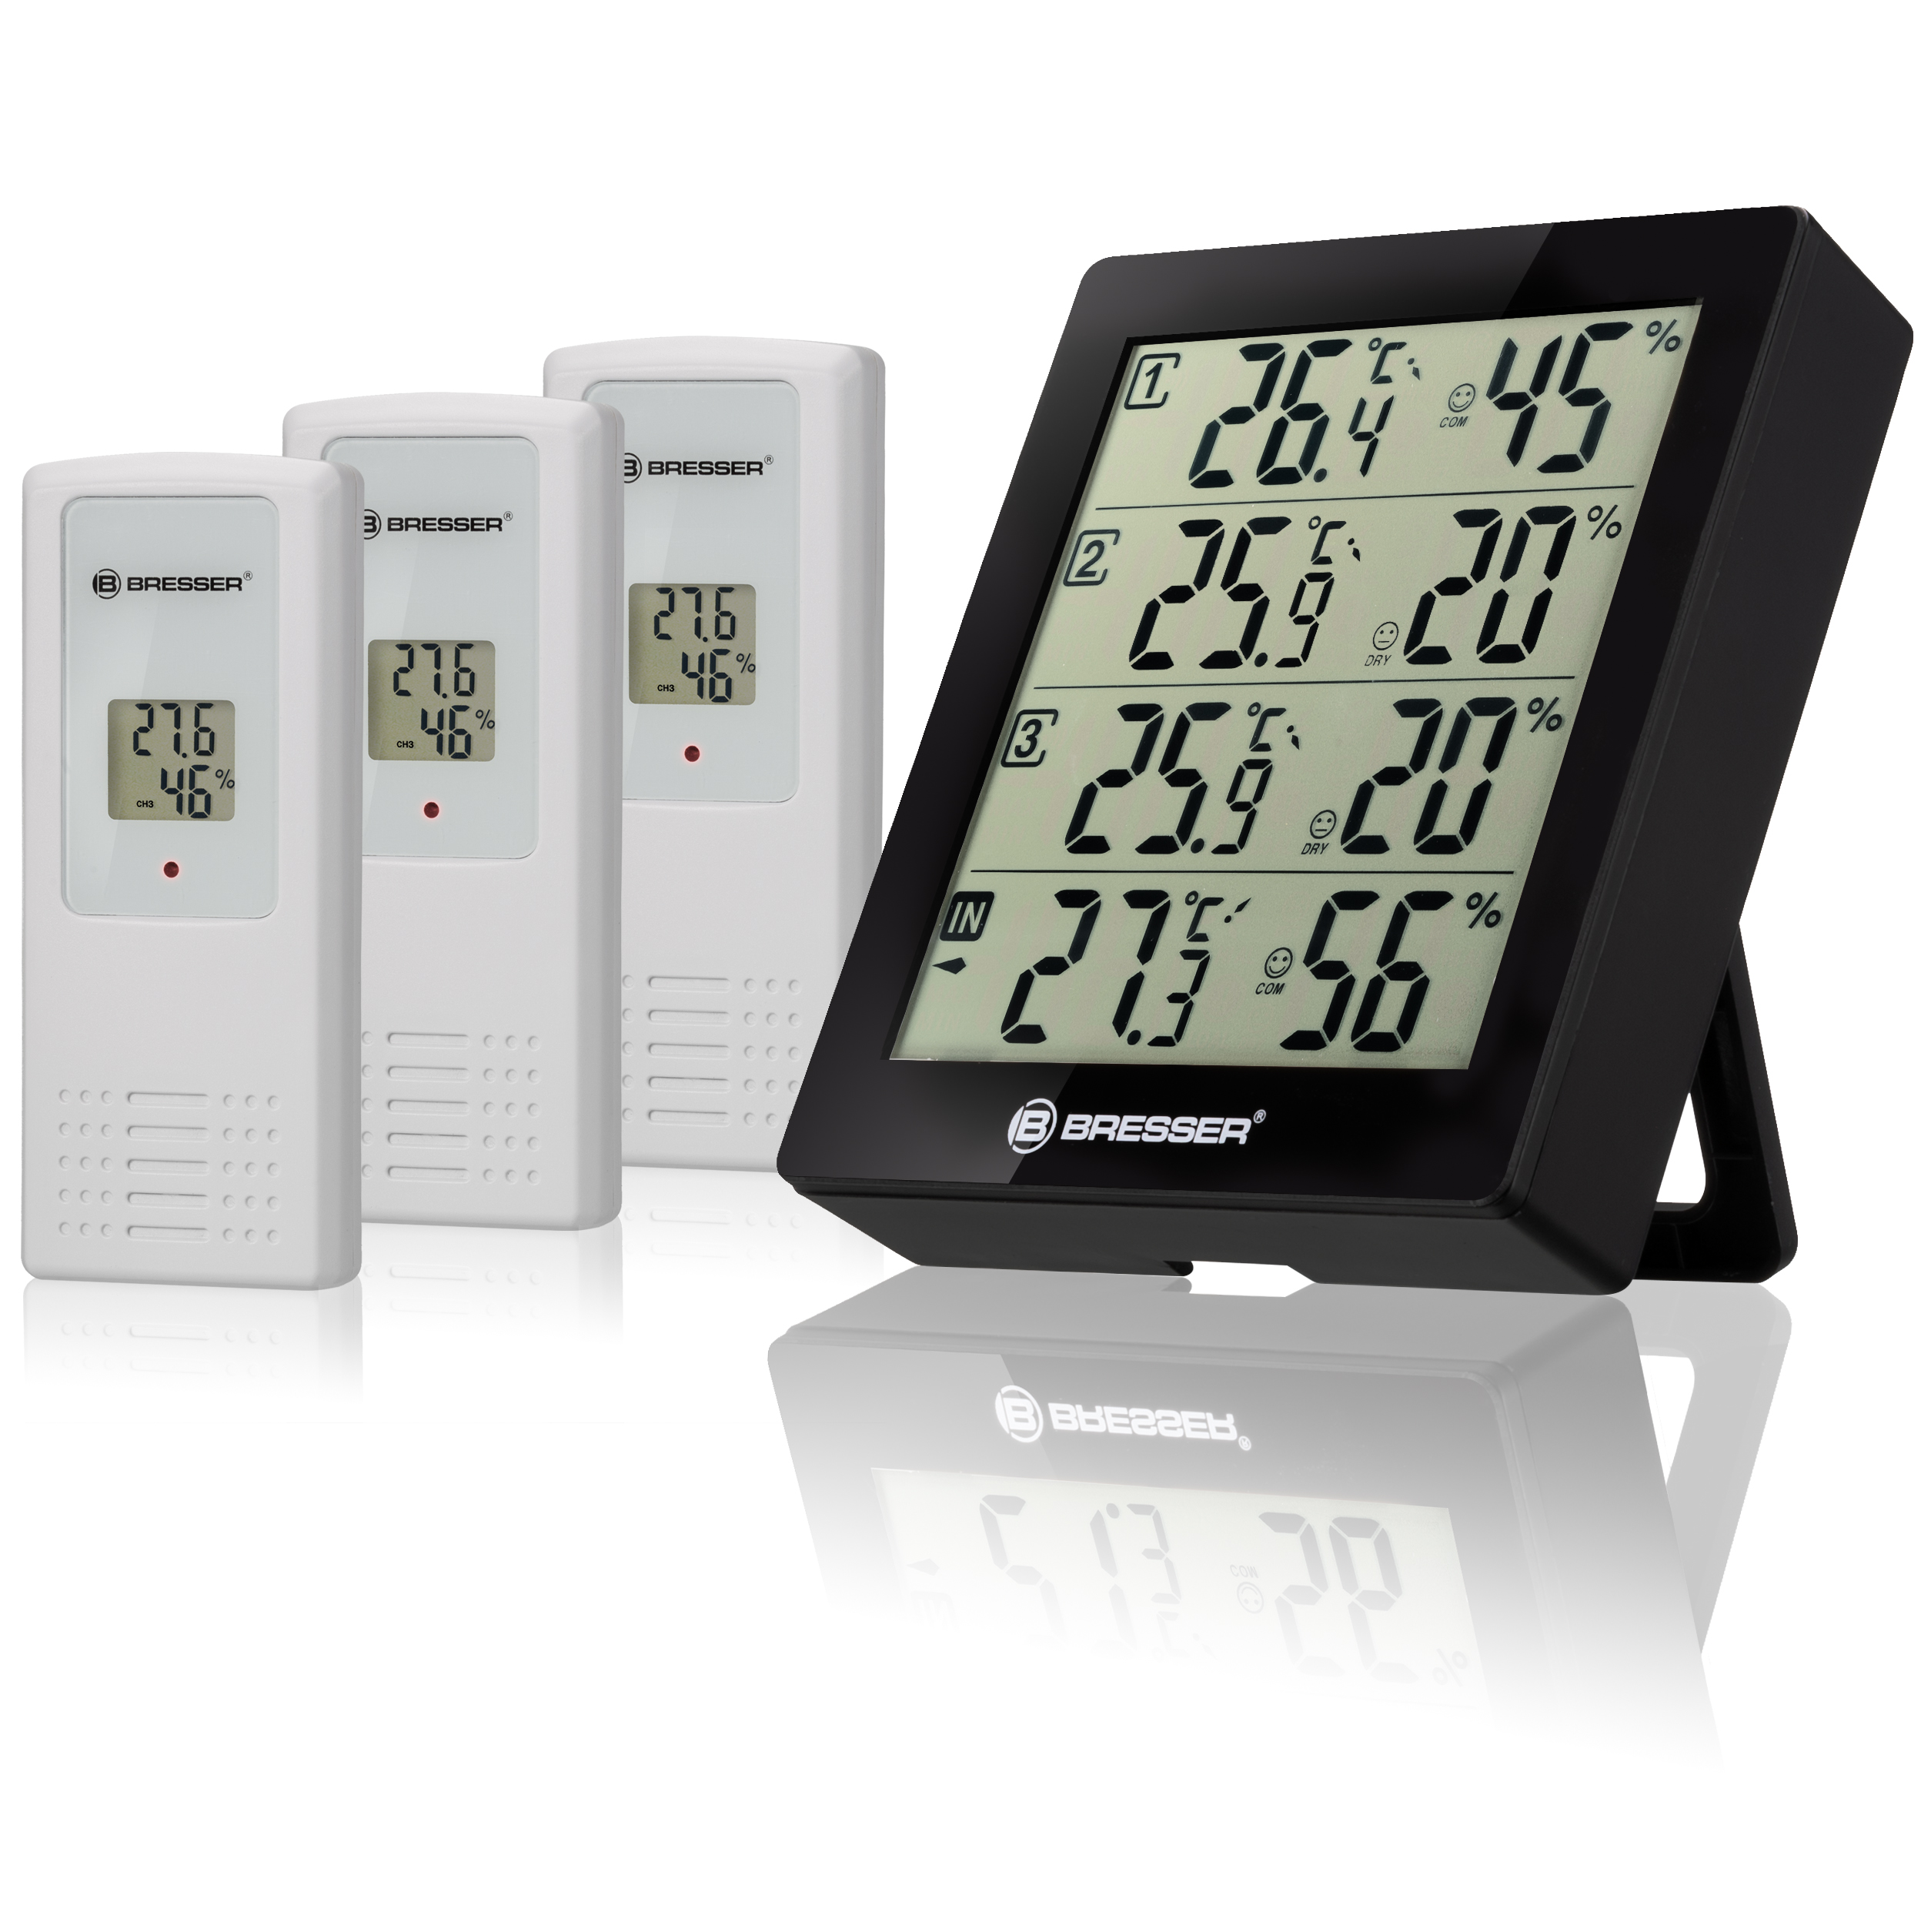 BRESSER Thermo-Hygrometer Quadro with 4 Independent Measuring Details